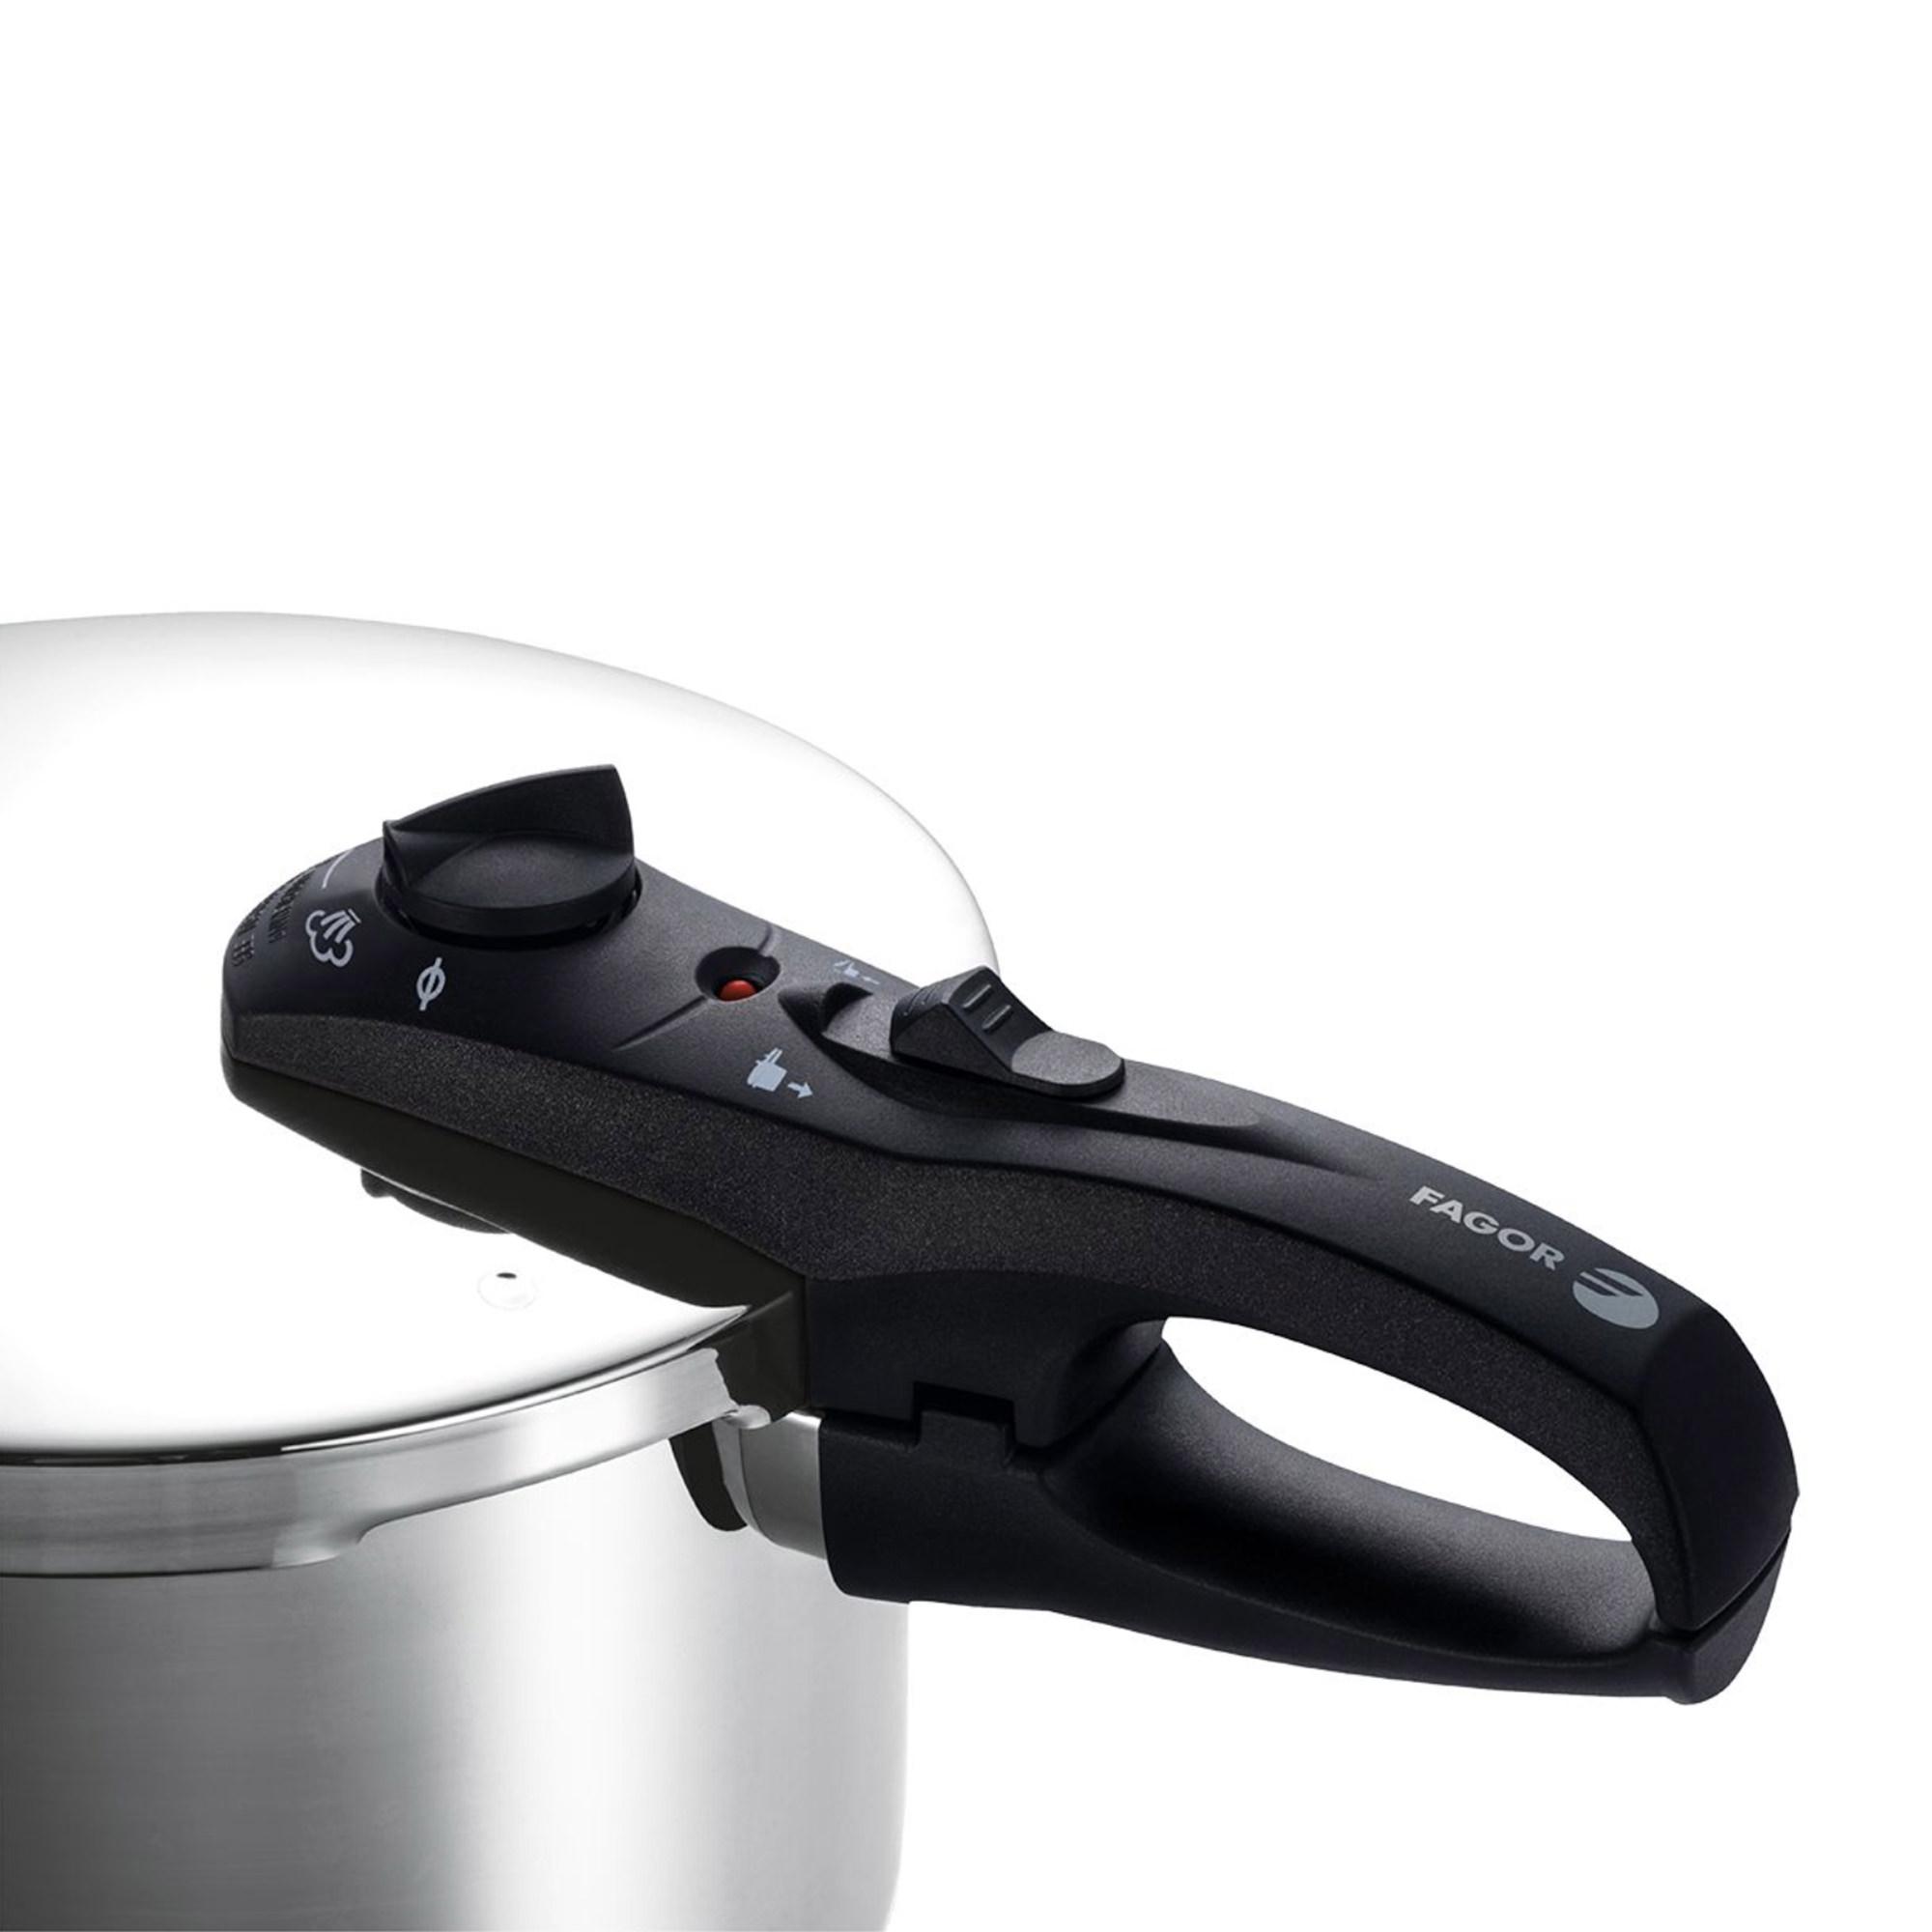 Fagor Duo Stainless Steel Pressure Cooker 6L Image 3